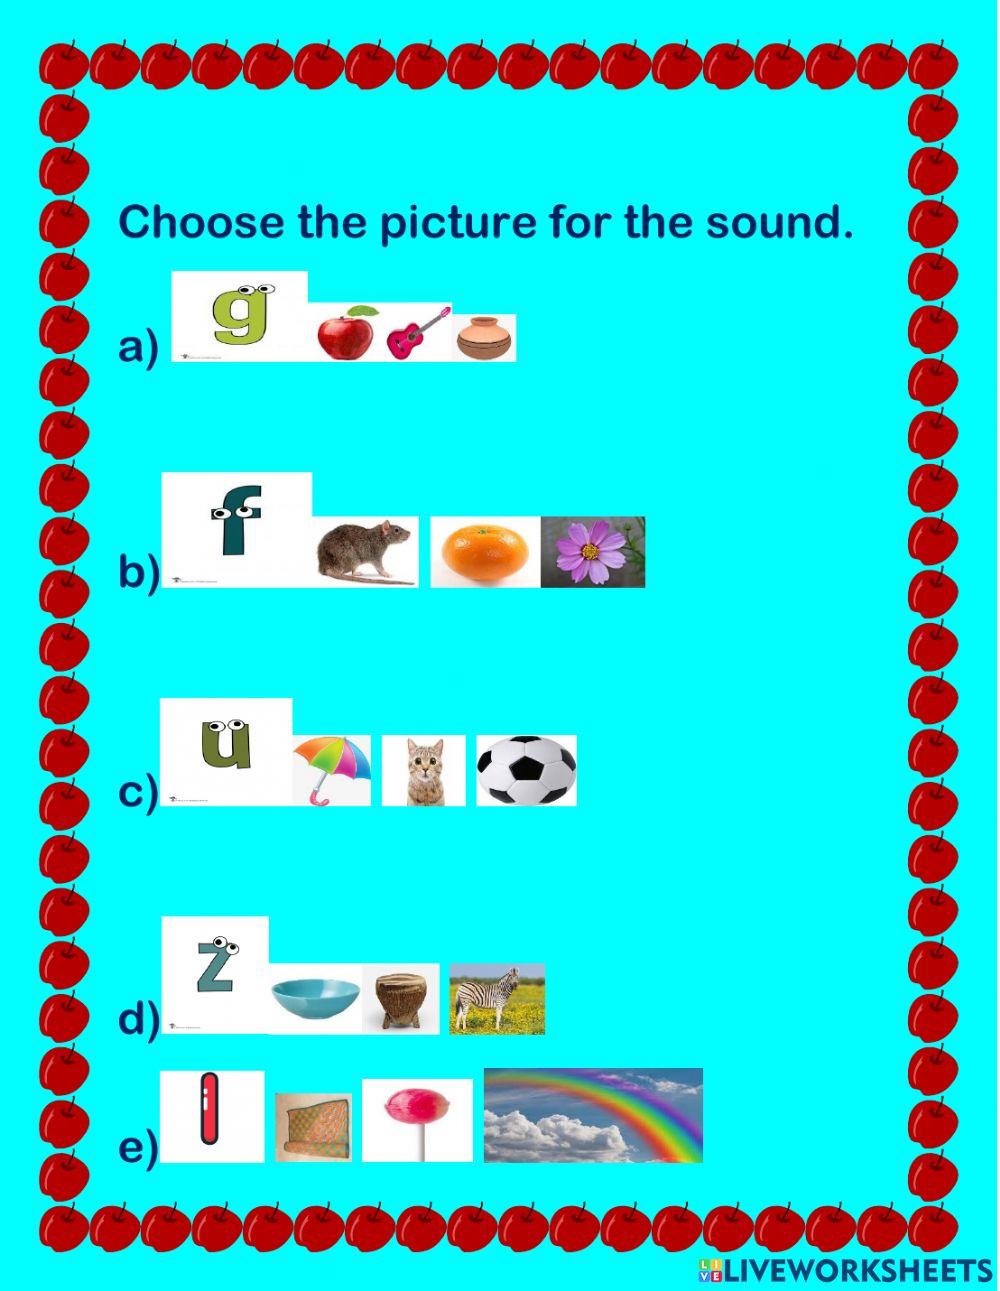 Choose the picture for the sound